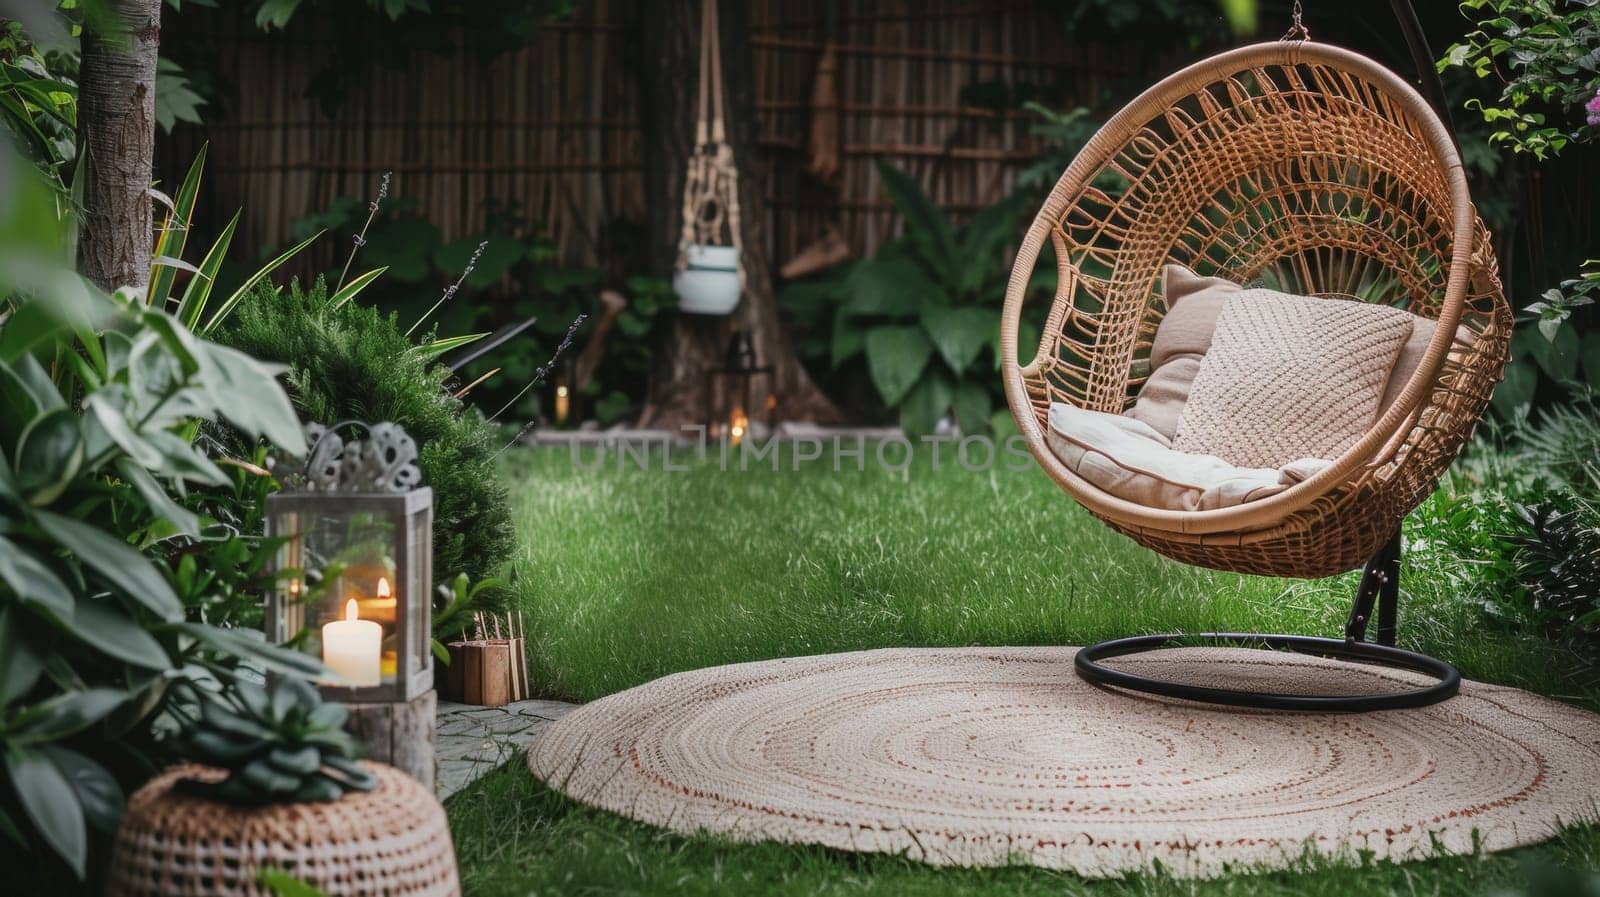 A hanging chair in a lush garden with candles and plants, AI by starush